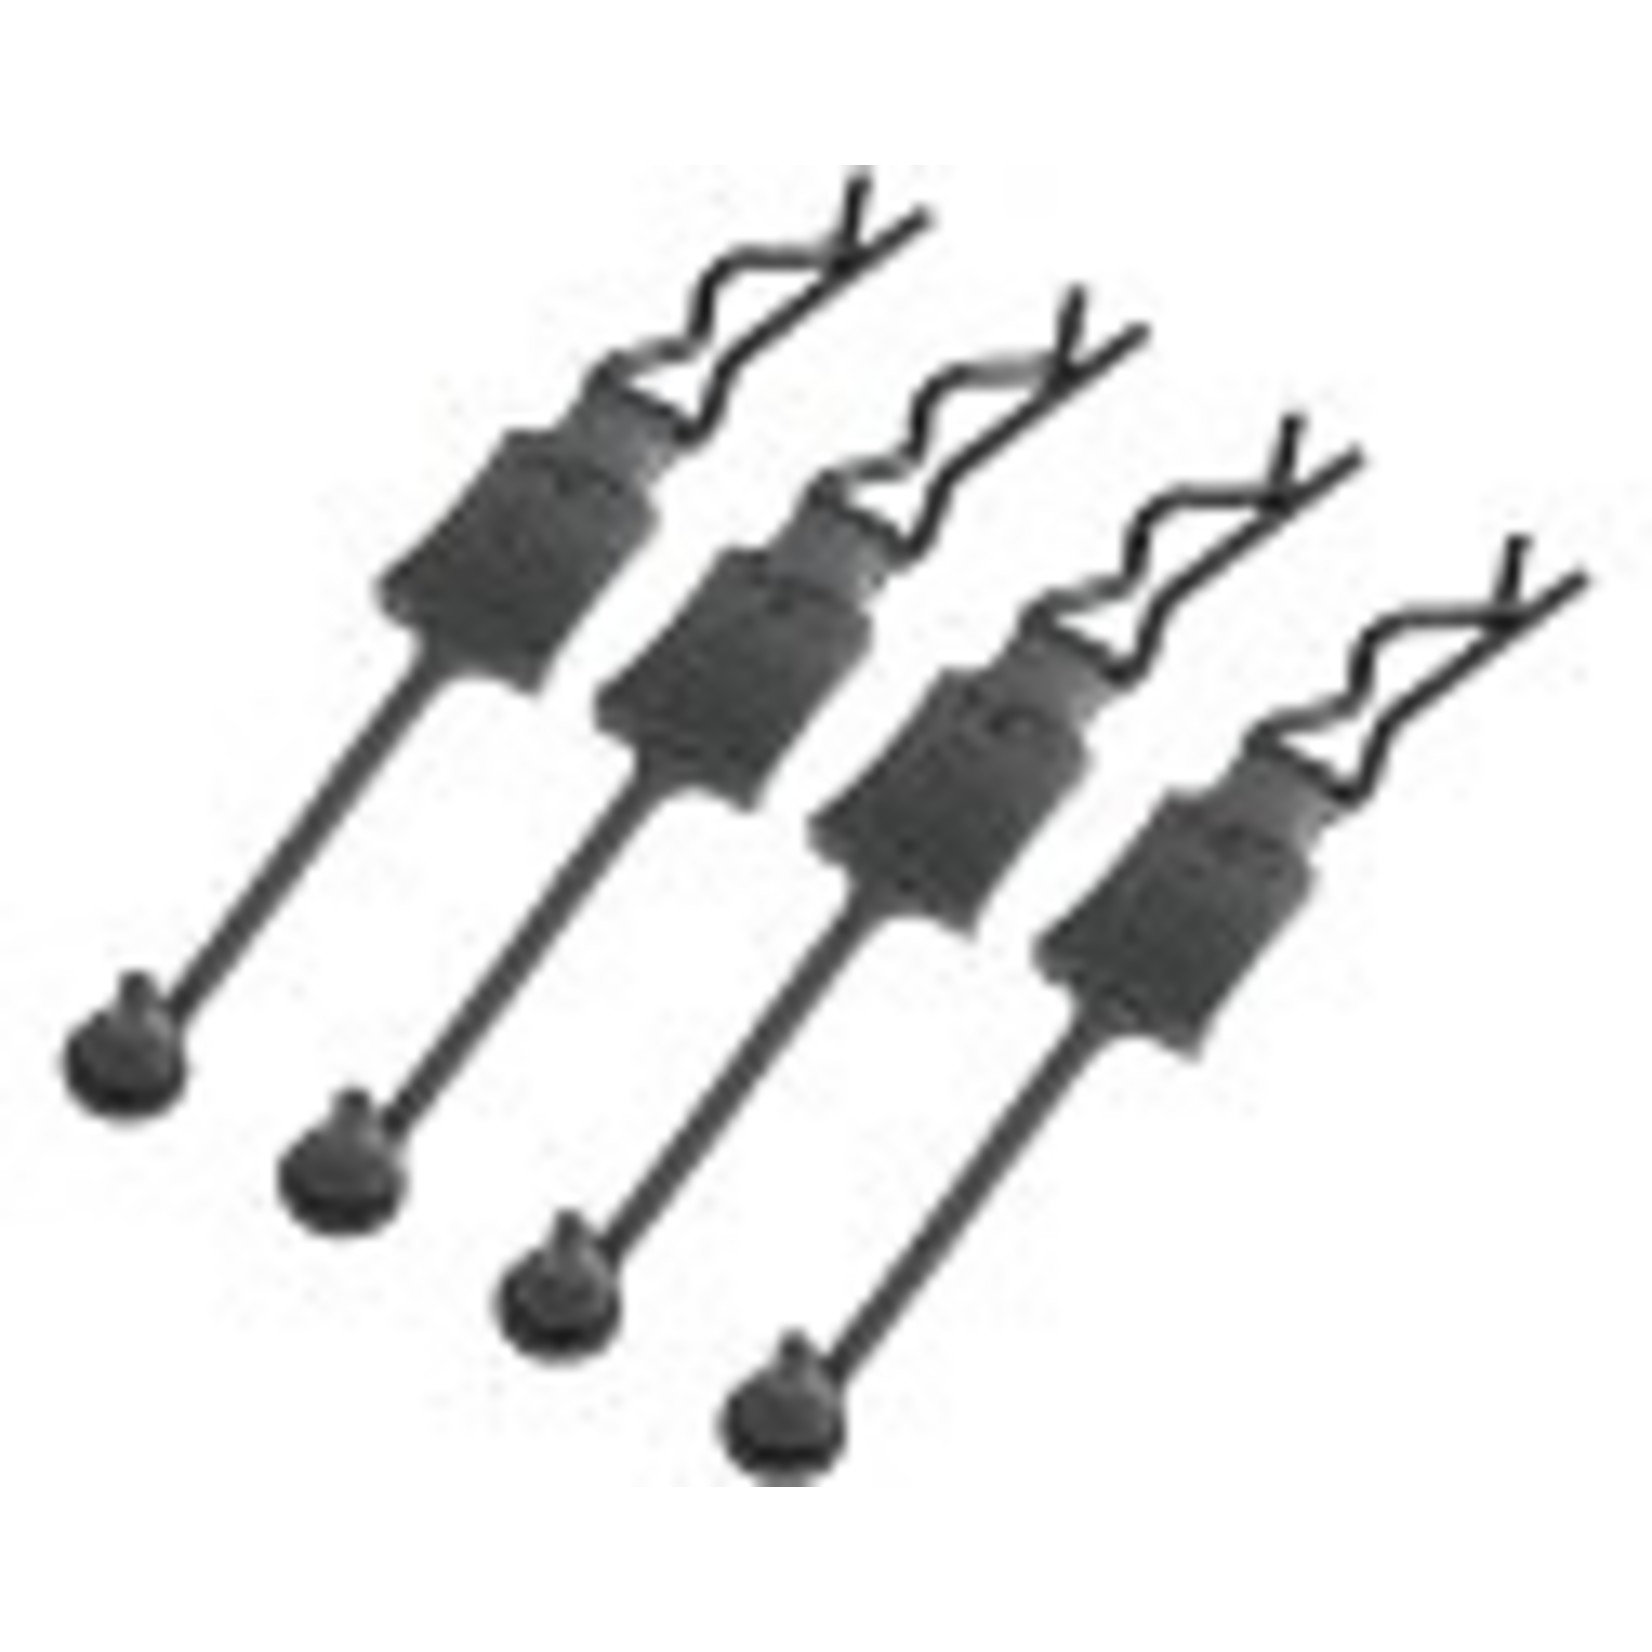 Hot Racing HRABWP39E01  Body Clip Retainers, for 1/8 Scale, Black Chrome (4pcs)